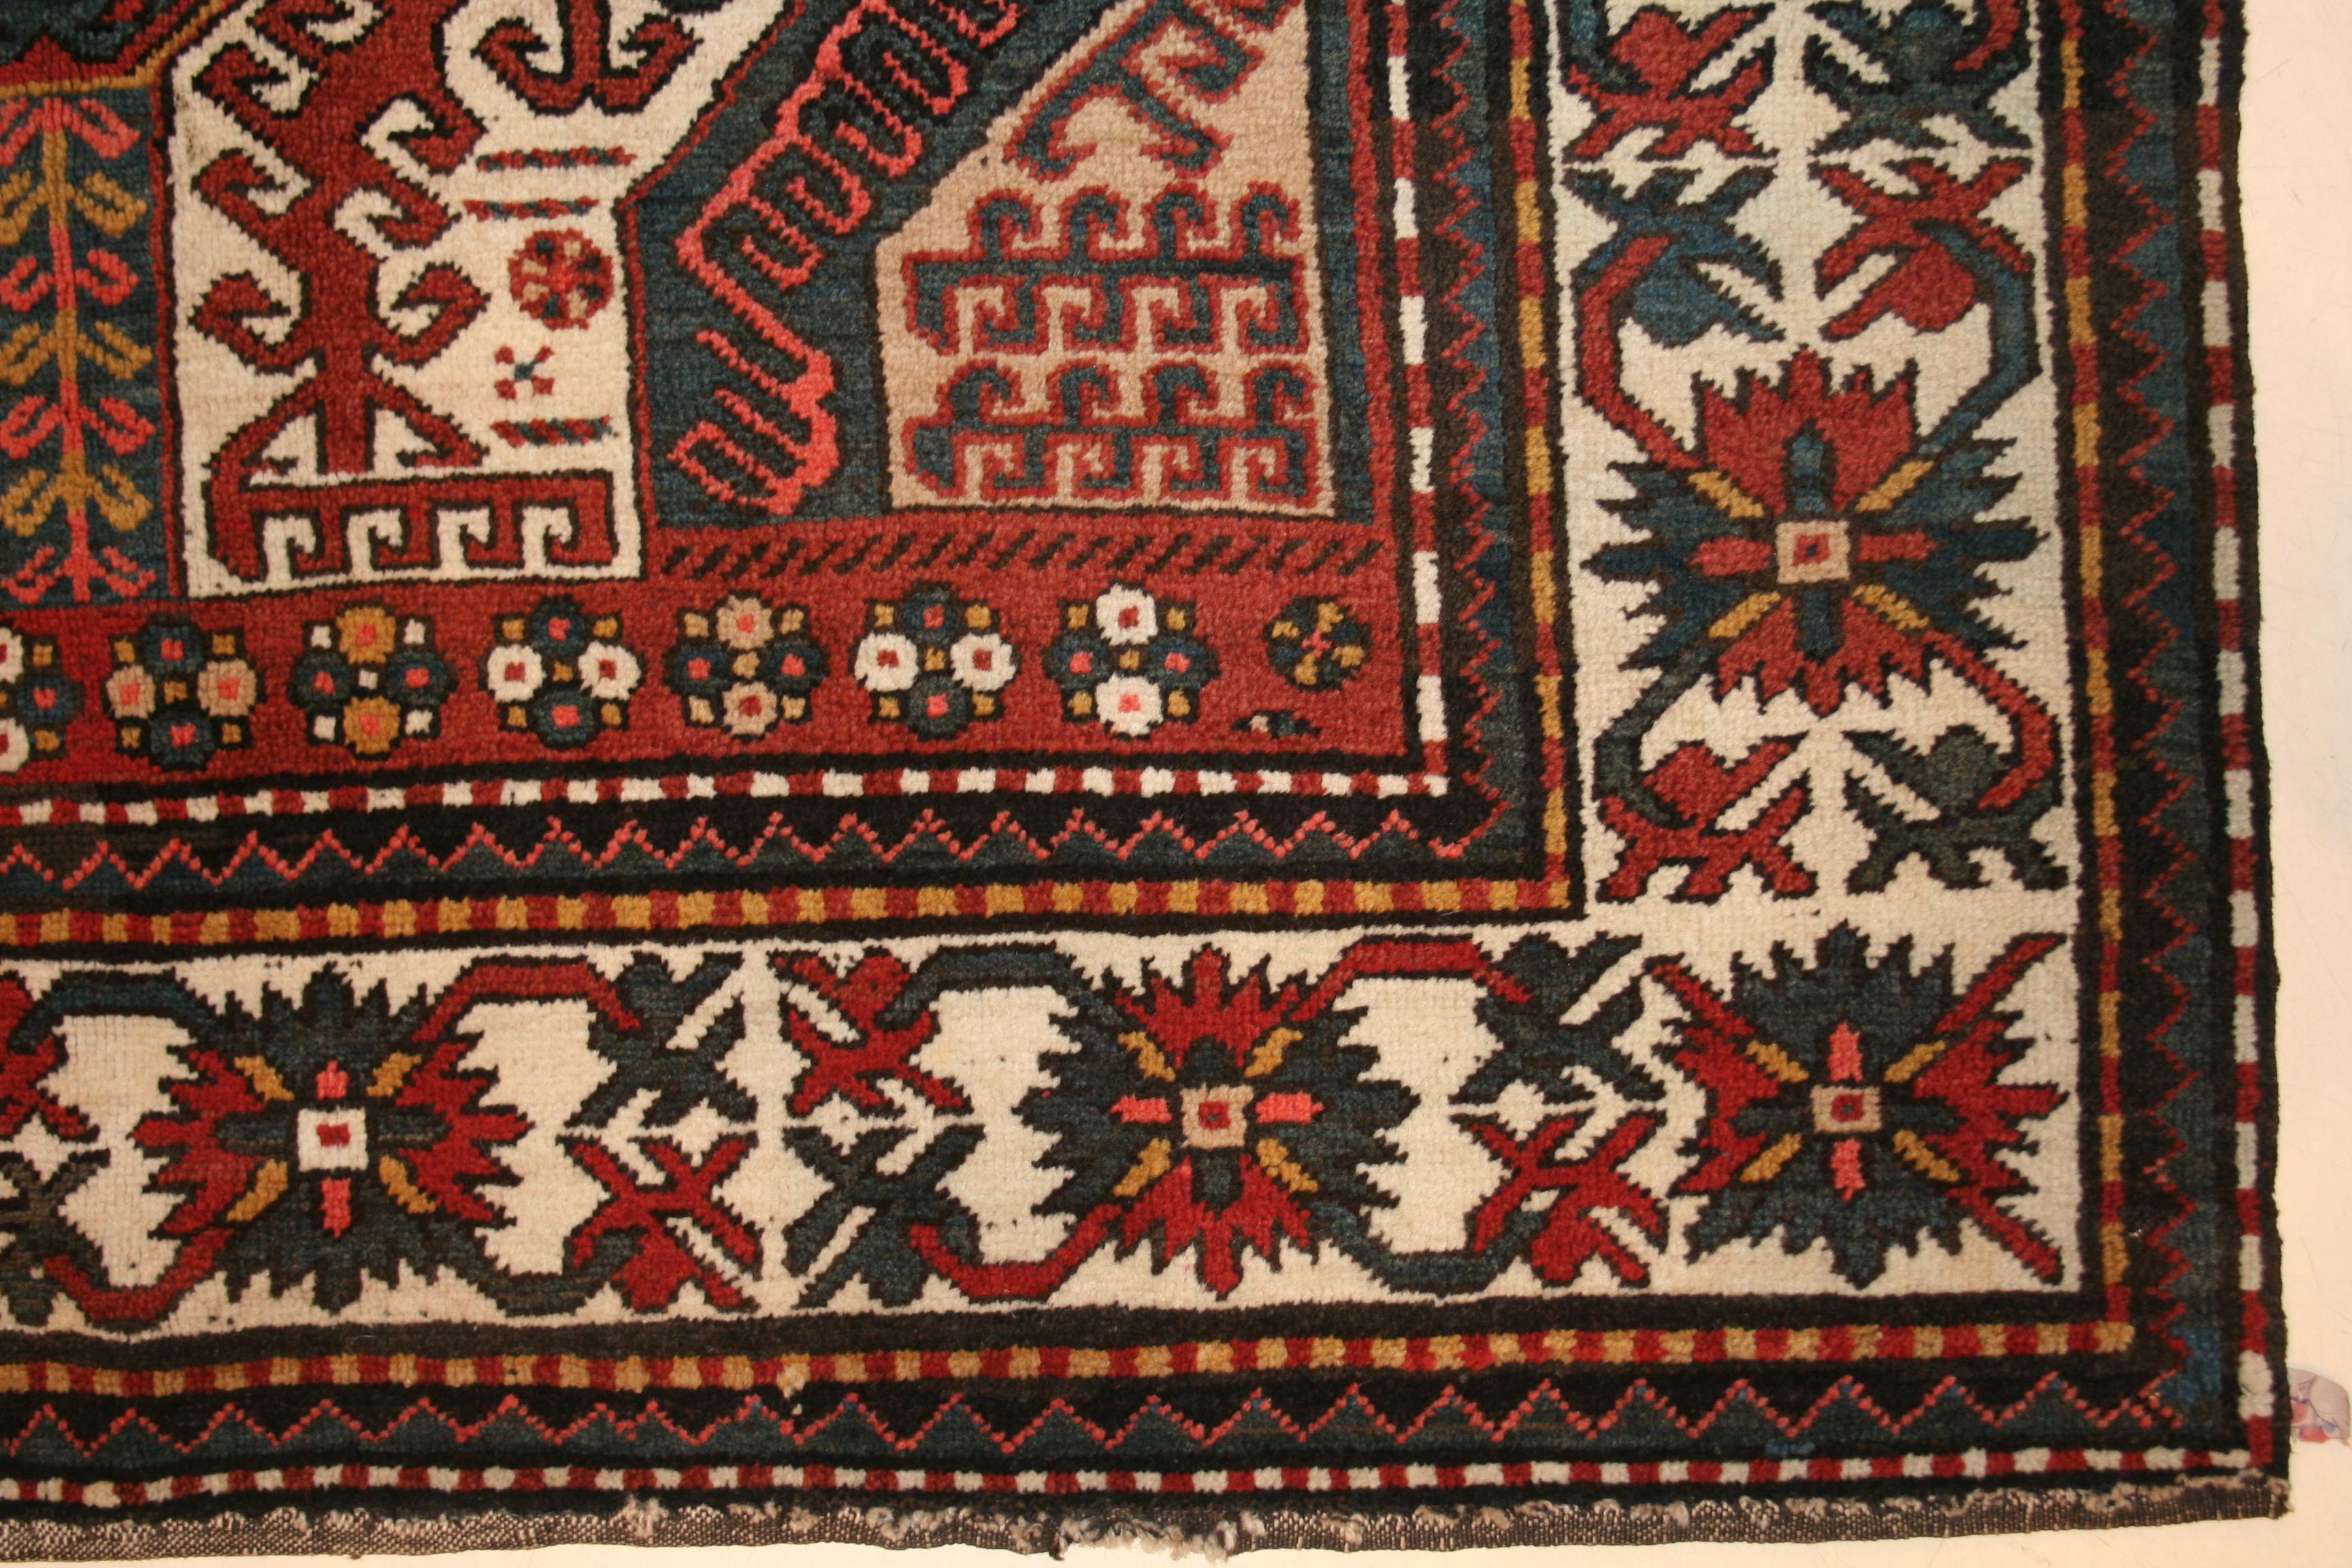 The southern Caucasian rugs of Chelaberd, Chondoresk and Kasim Ushag are all inspired by the early phase of silk Caucasian embroideries. In this finely woven, pristine example, characterized by a brilliant palette, we see a central scorpion-like